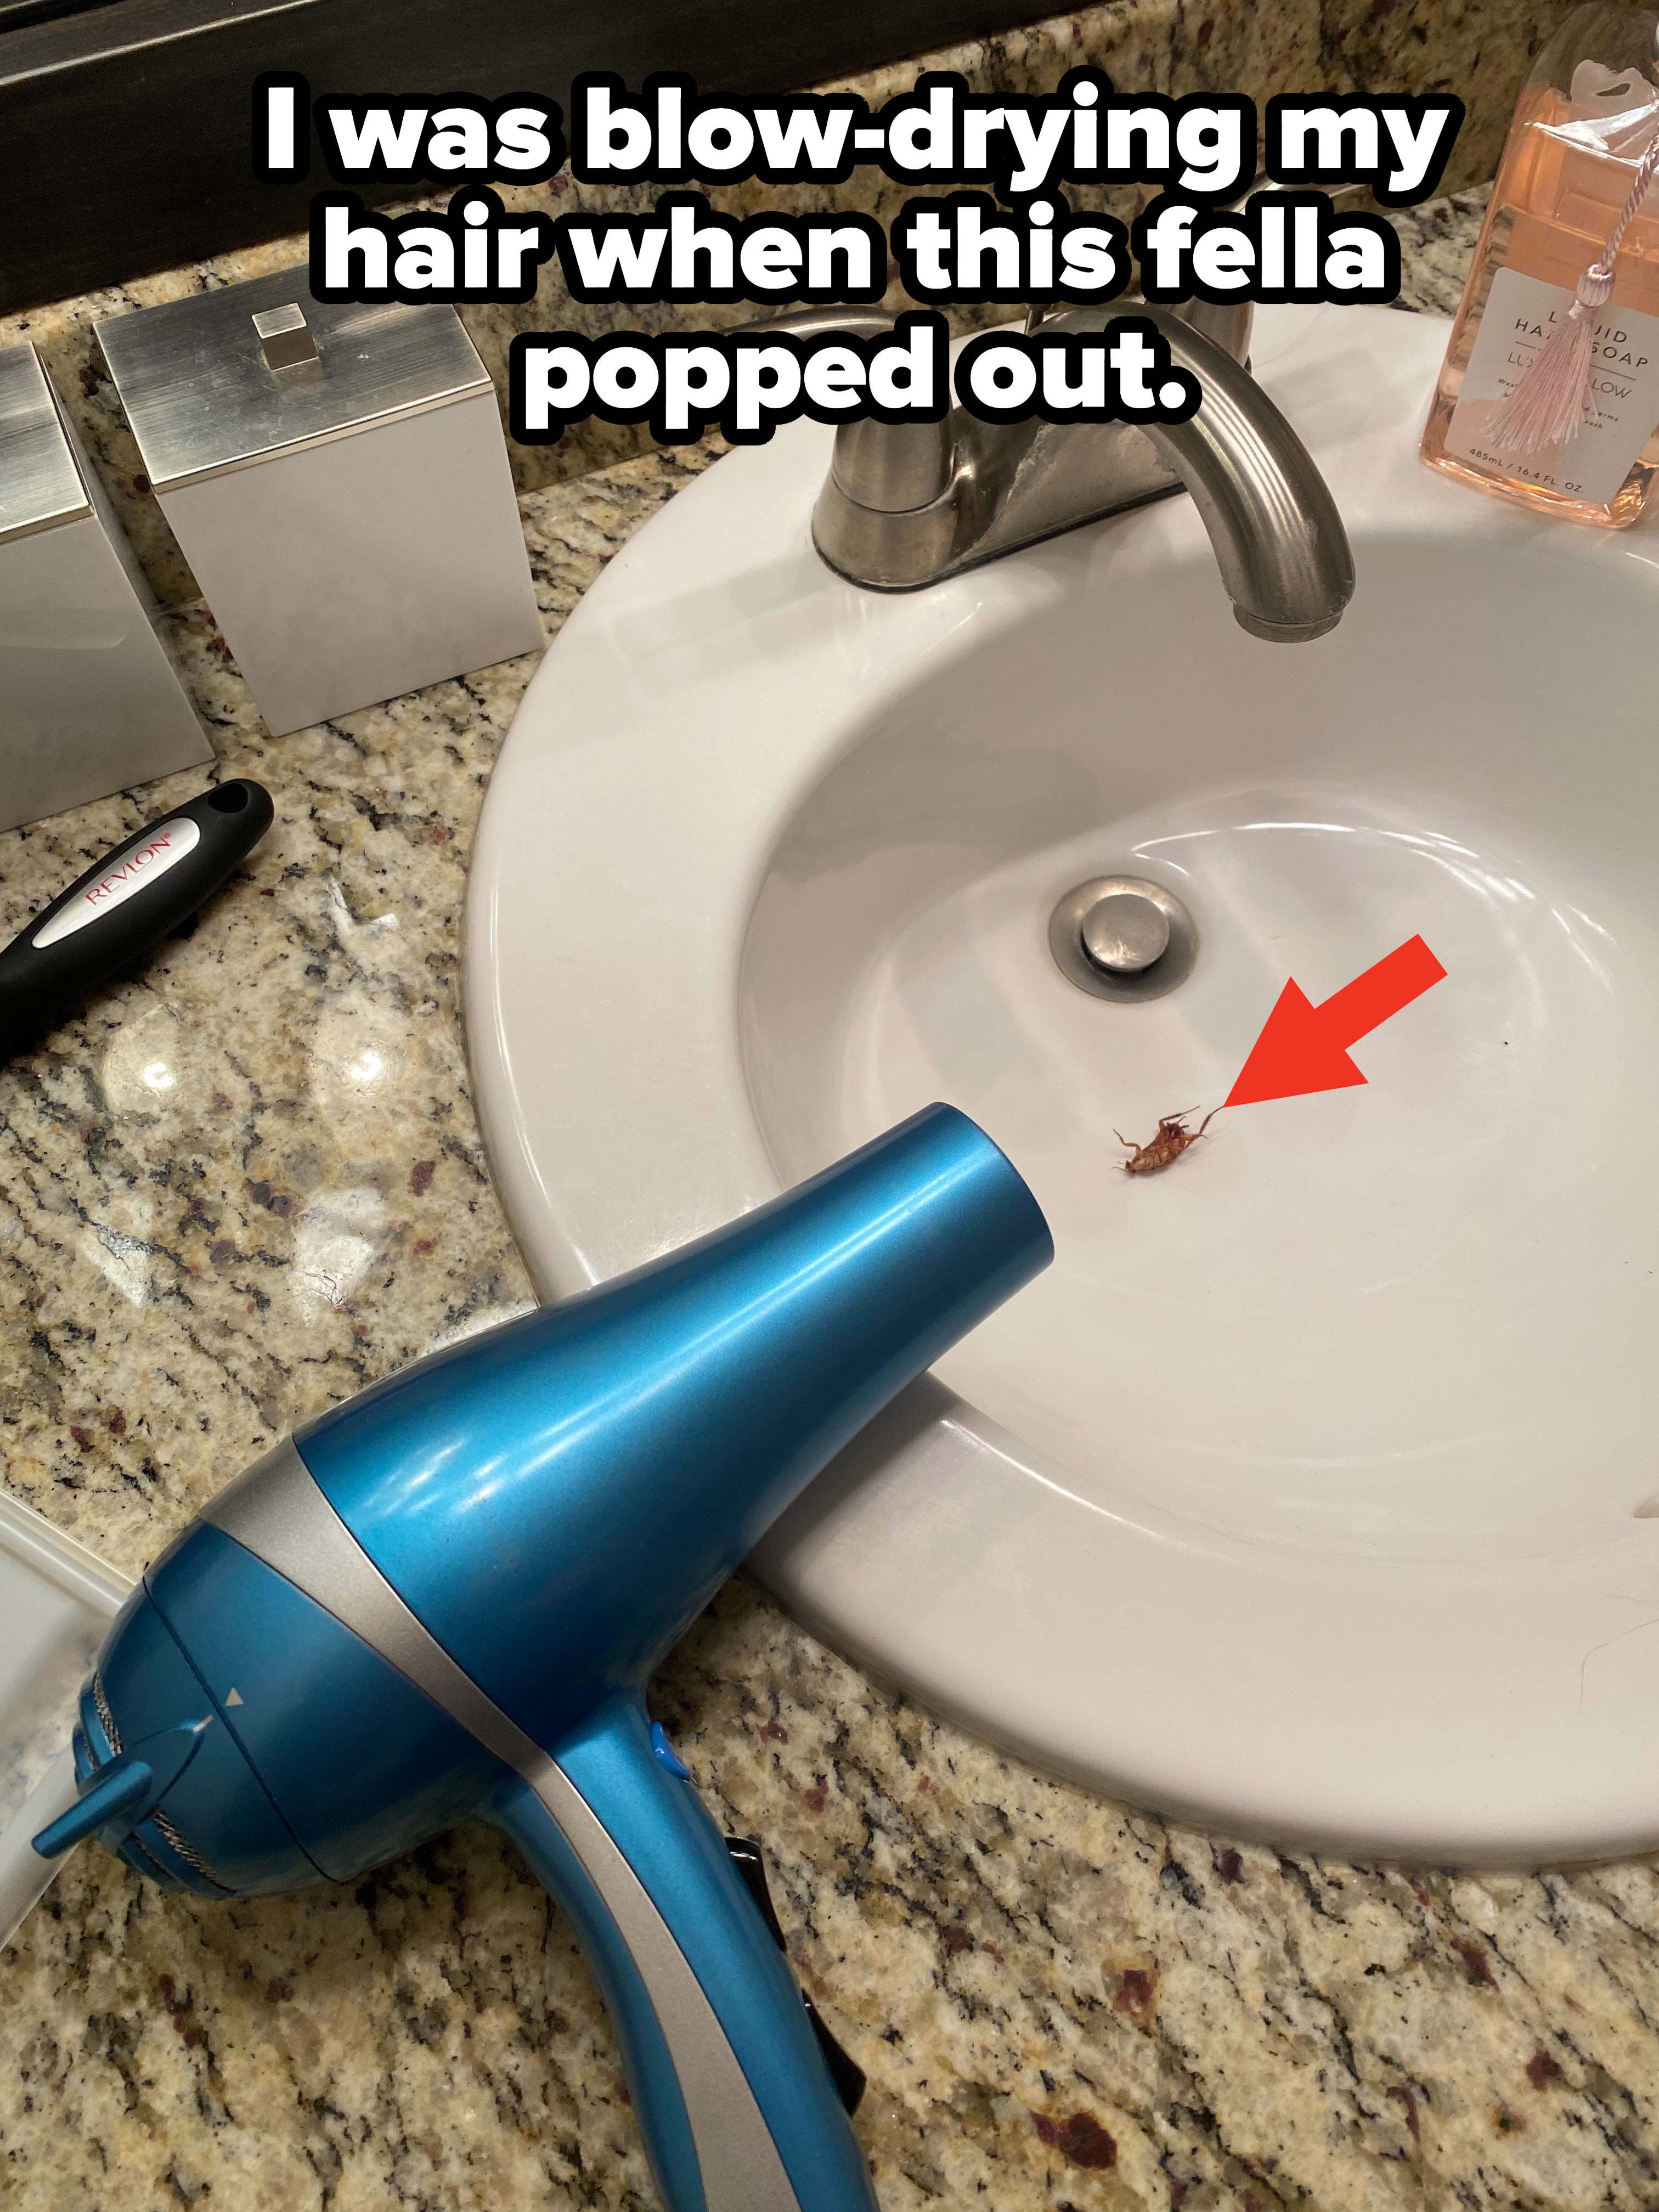 A dead roach in a sink with a blow-dryer on the side, with caption, &quot;I was blow-drying my hair when this fella popped out&quot;